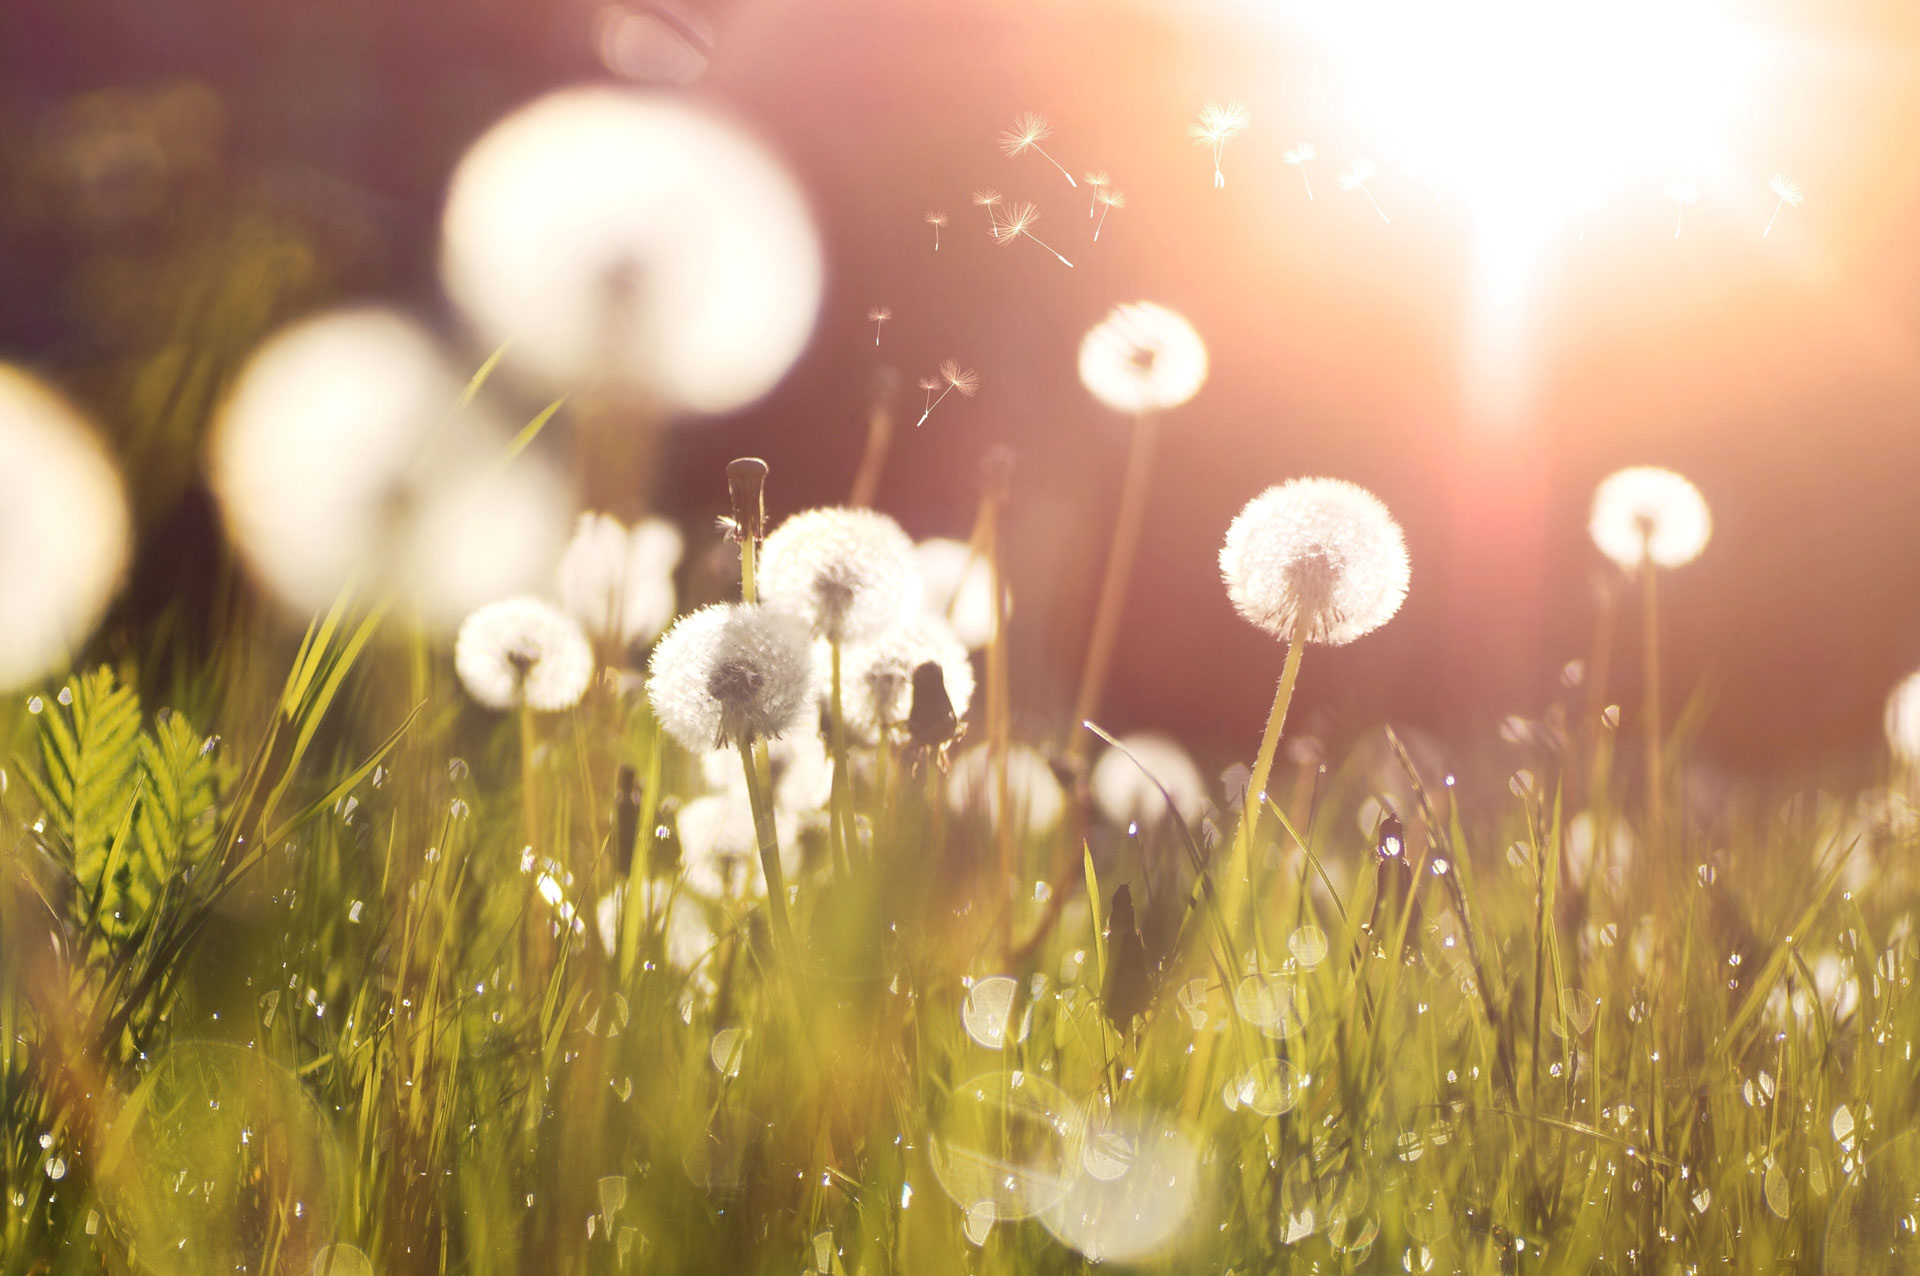 A sunlit field of dandelions with some seeds blowing in the breeze. The soft focus and bright light create a dreamy atmosphere reminiscent of a serene, early-morning scene outside a mental hospital. Dewdrops are visible on the grass, adding to the tranquility.